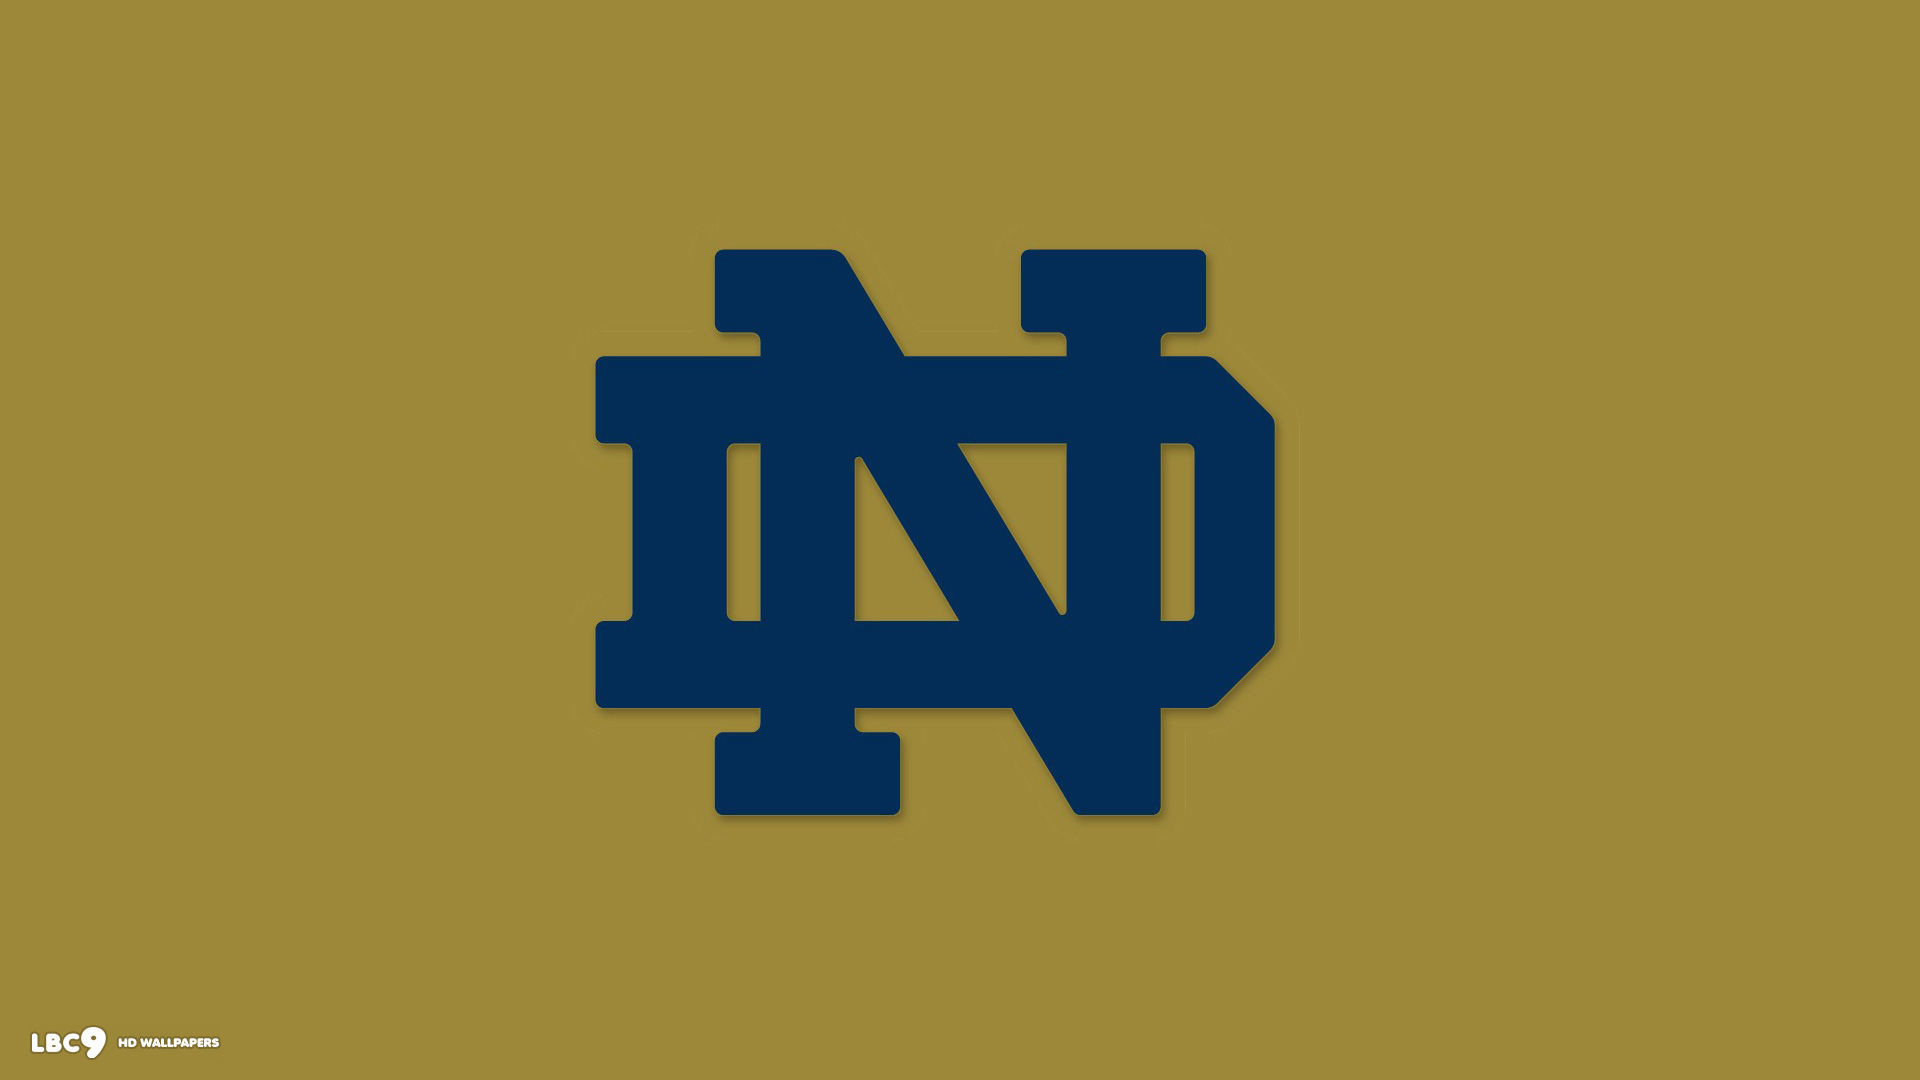 Need a NEW WALLPAPER for your Smartphone Here you GO IRISH GO  Notre  dame football Notre dame wallpaper Fighting irish football